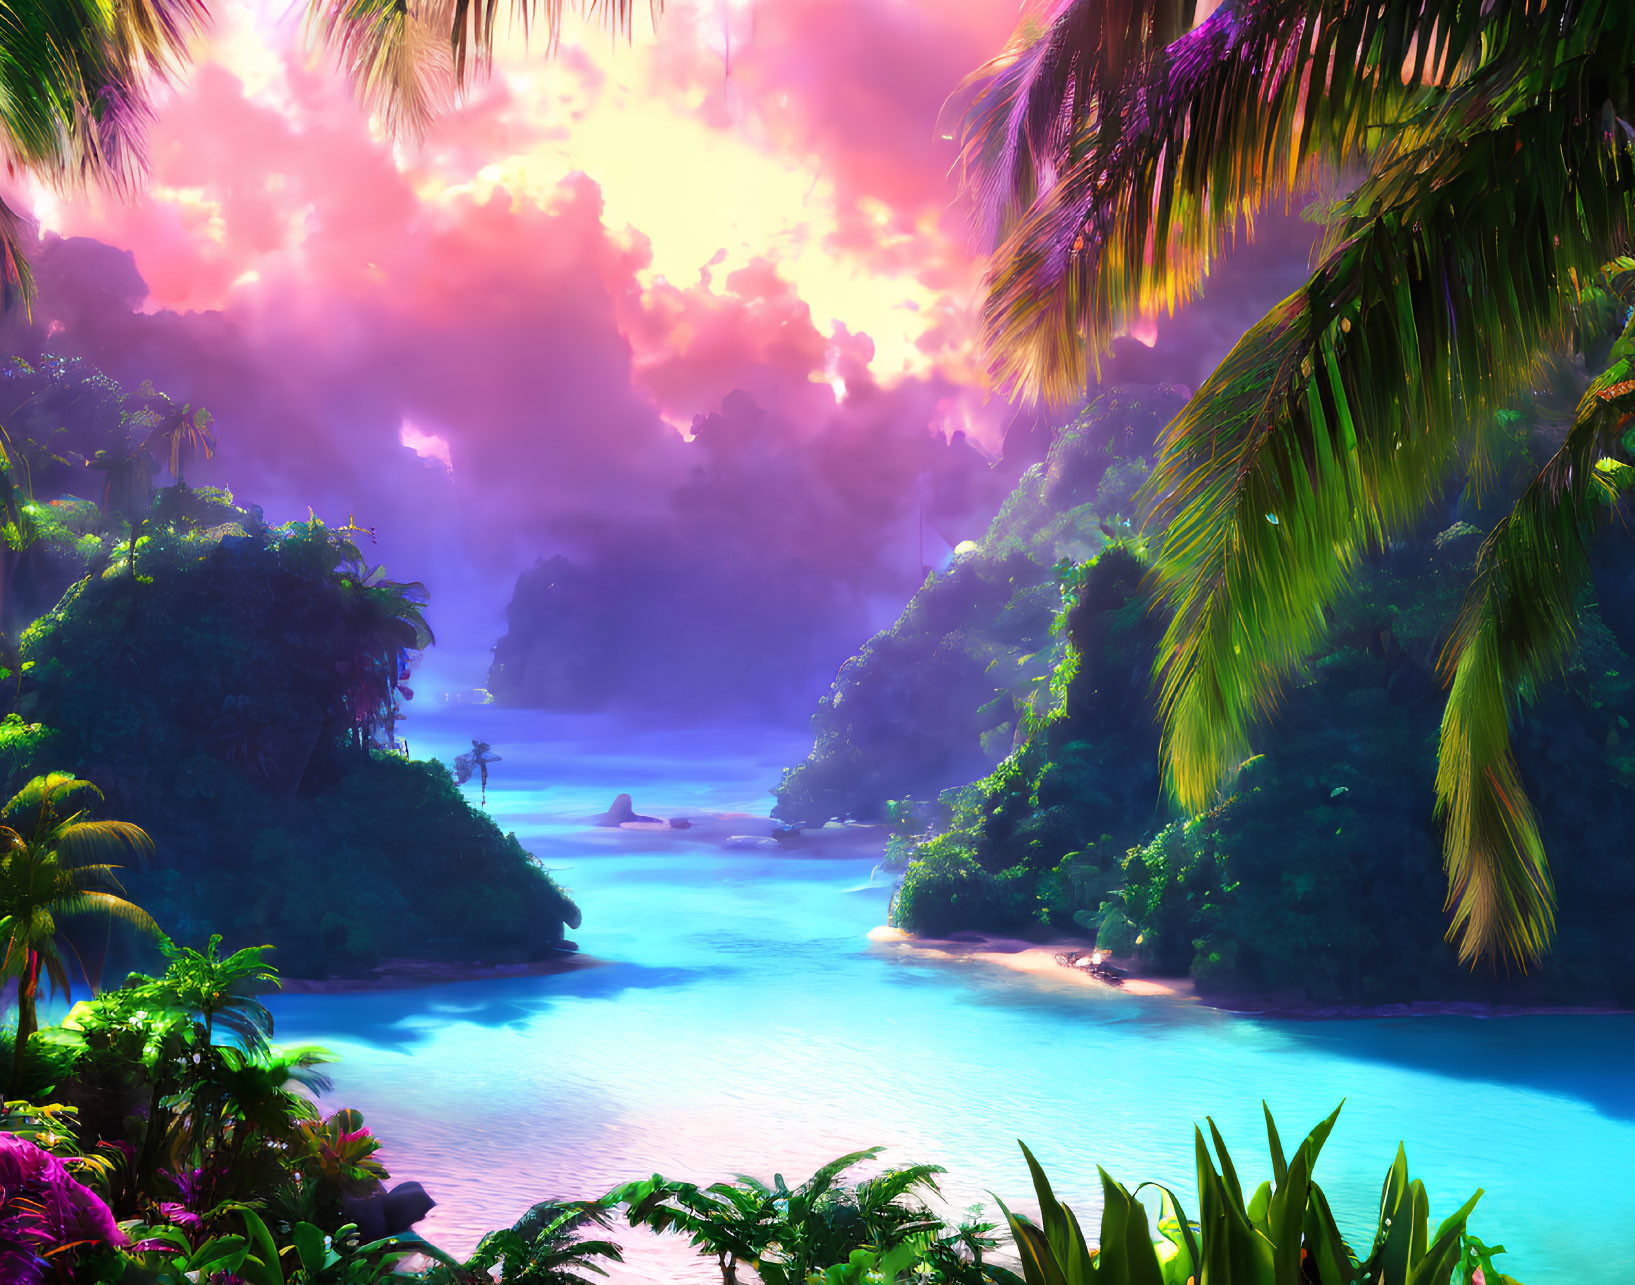 Tropical landscape with pink and purple sunset sky, palm trees, river, sea